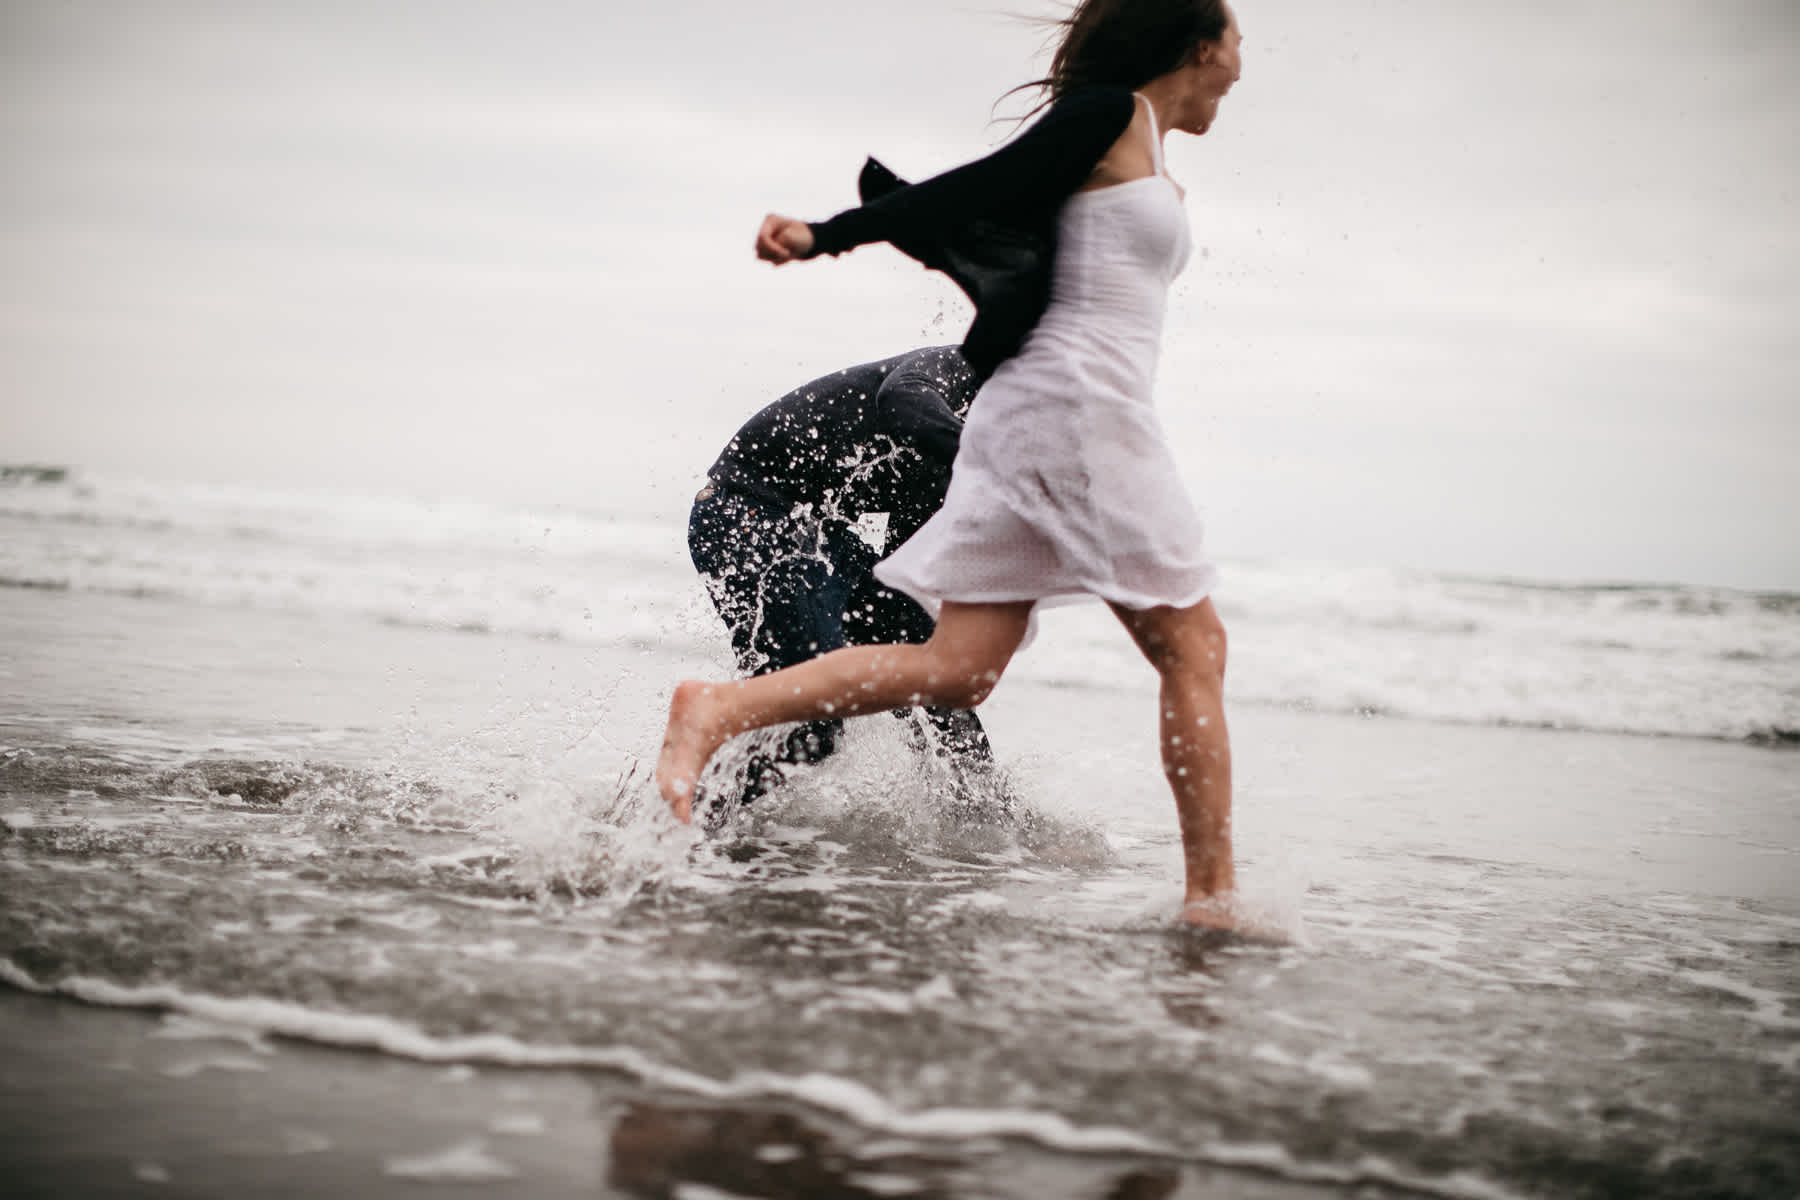 fort-funston-foggy-fun-beach-water-engagement-session-76